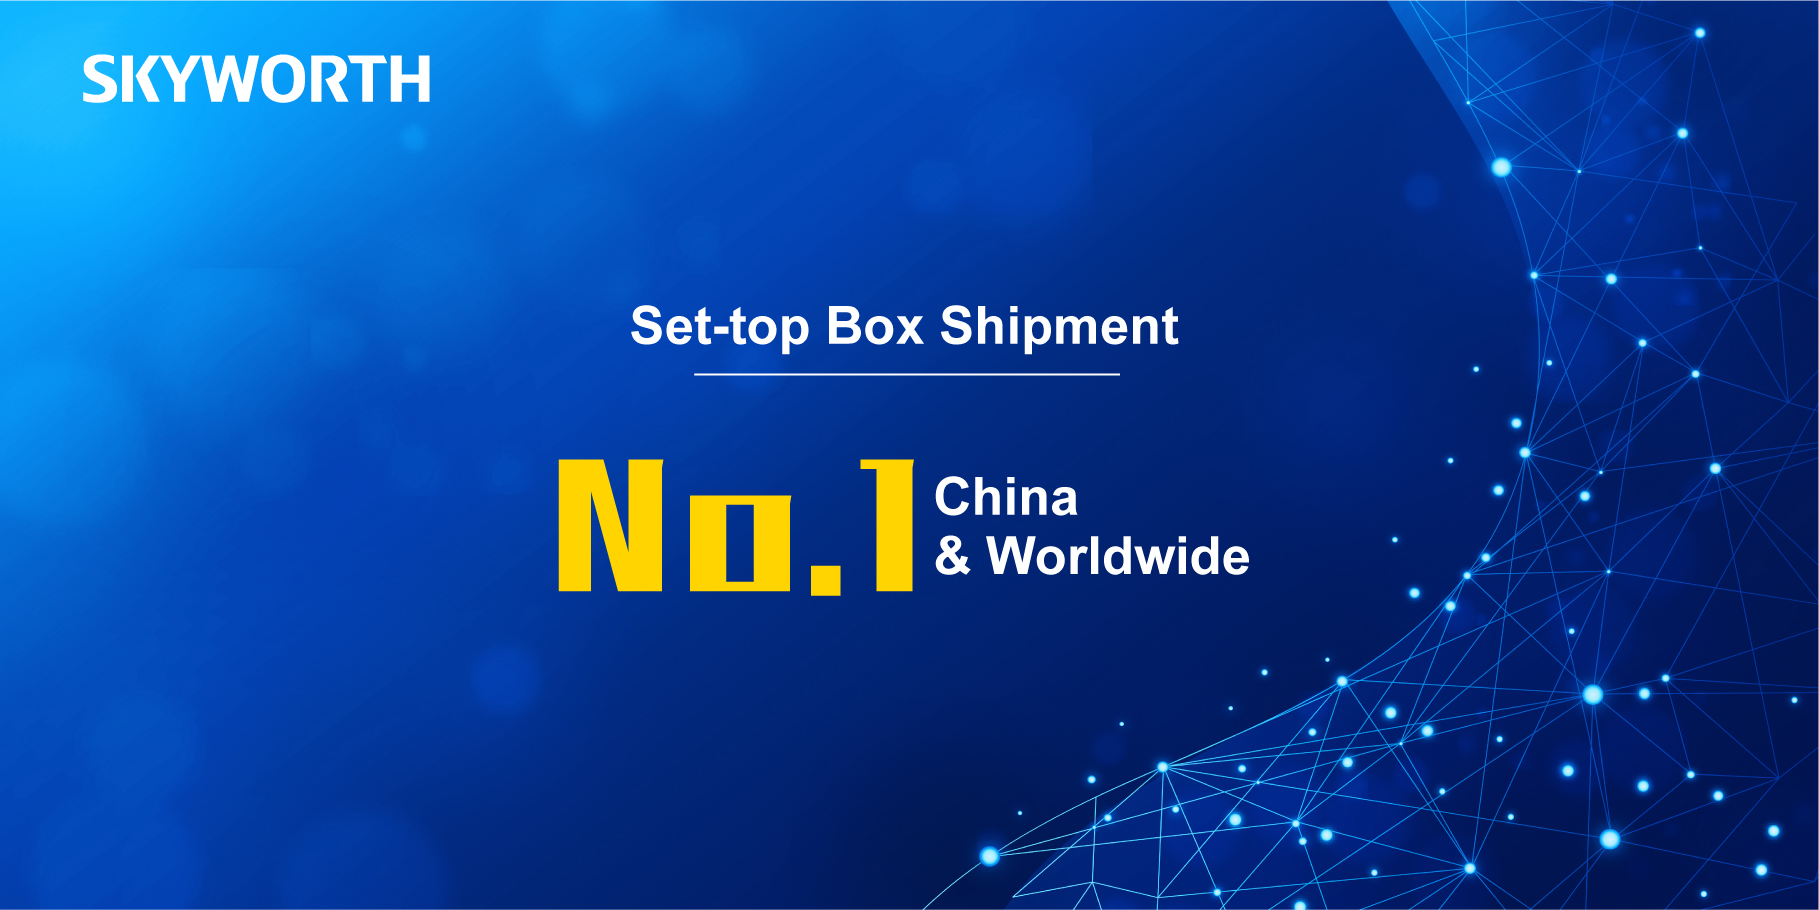 Skyworth Leads the Global Set-top Box Market with Innovative Solutions